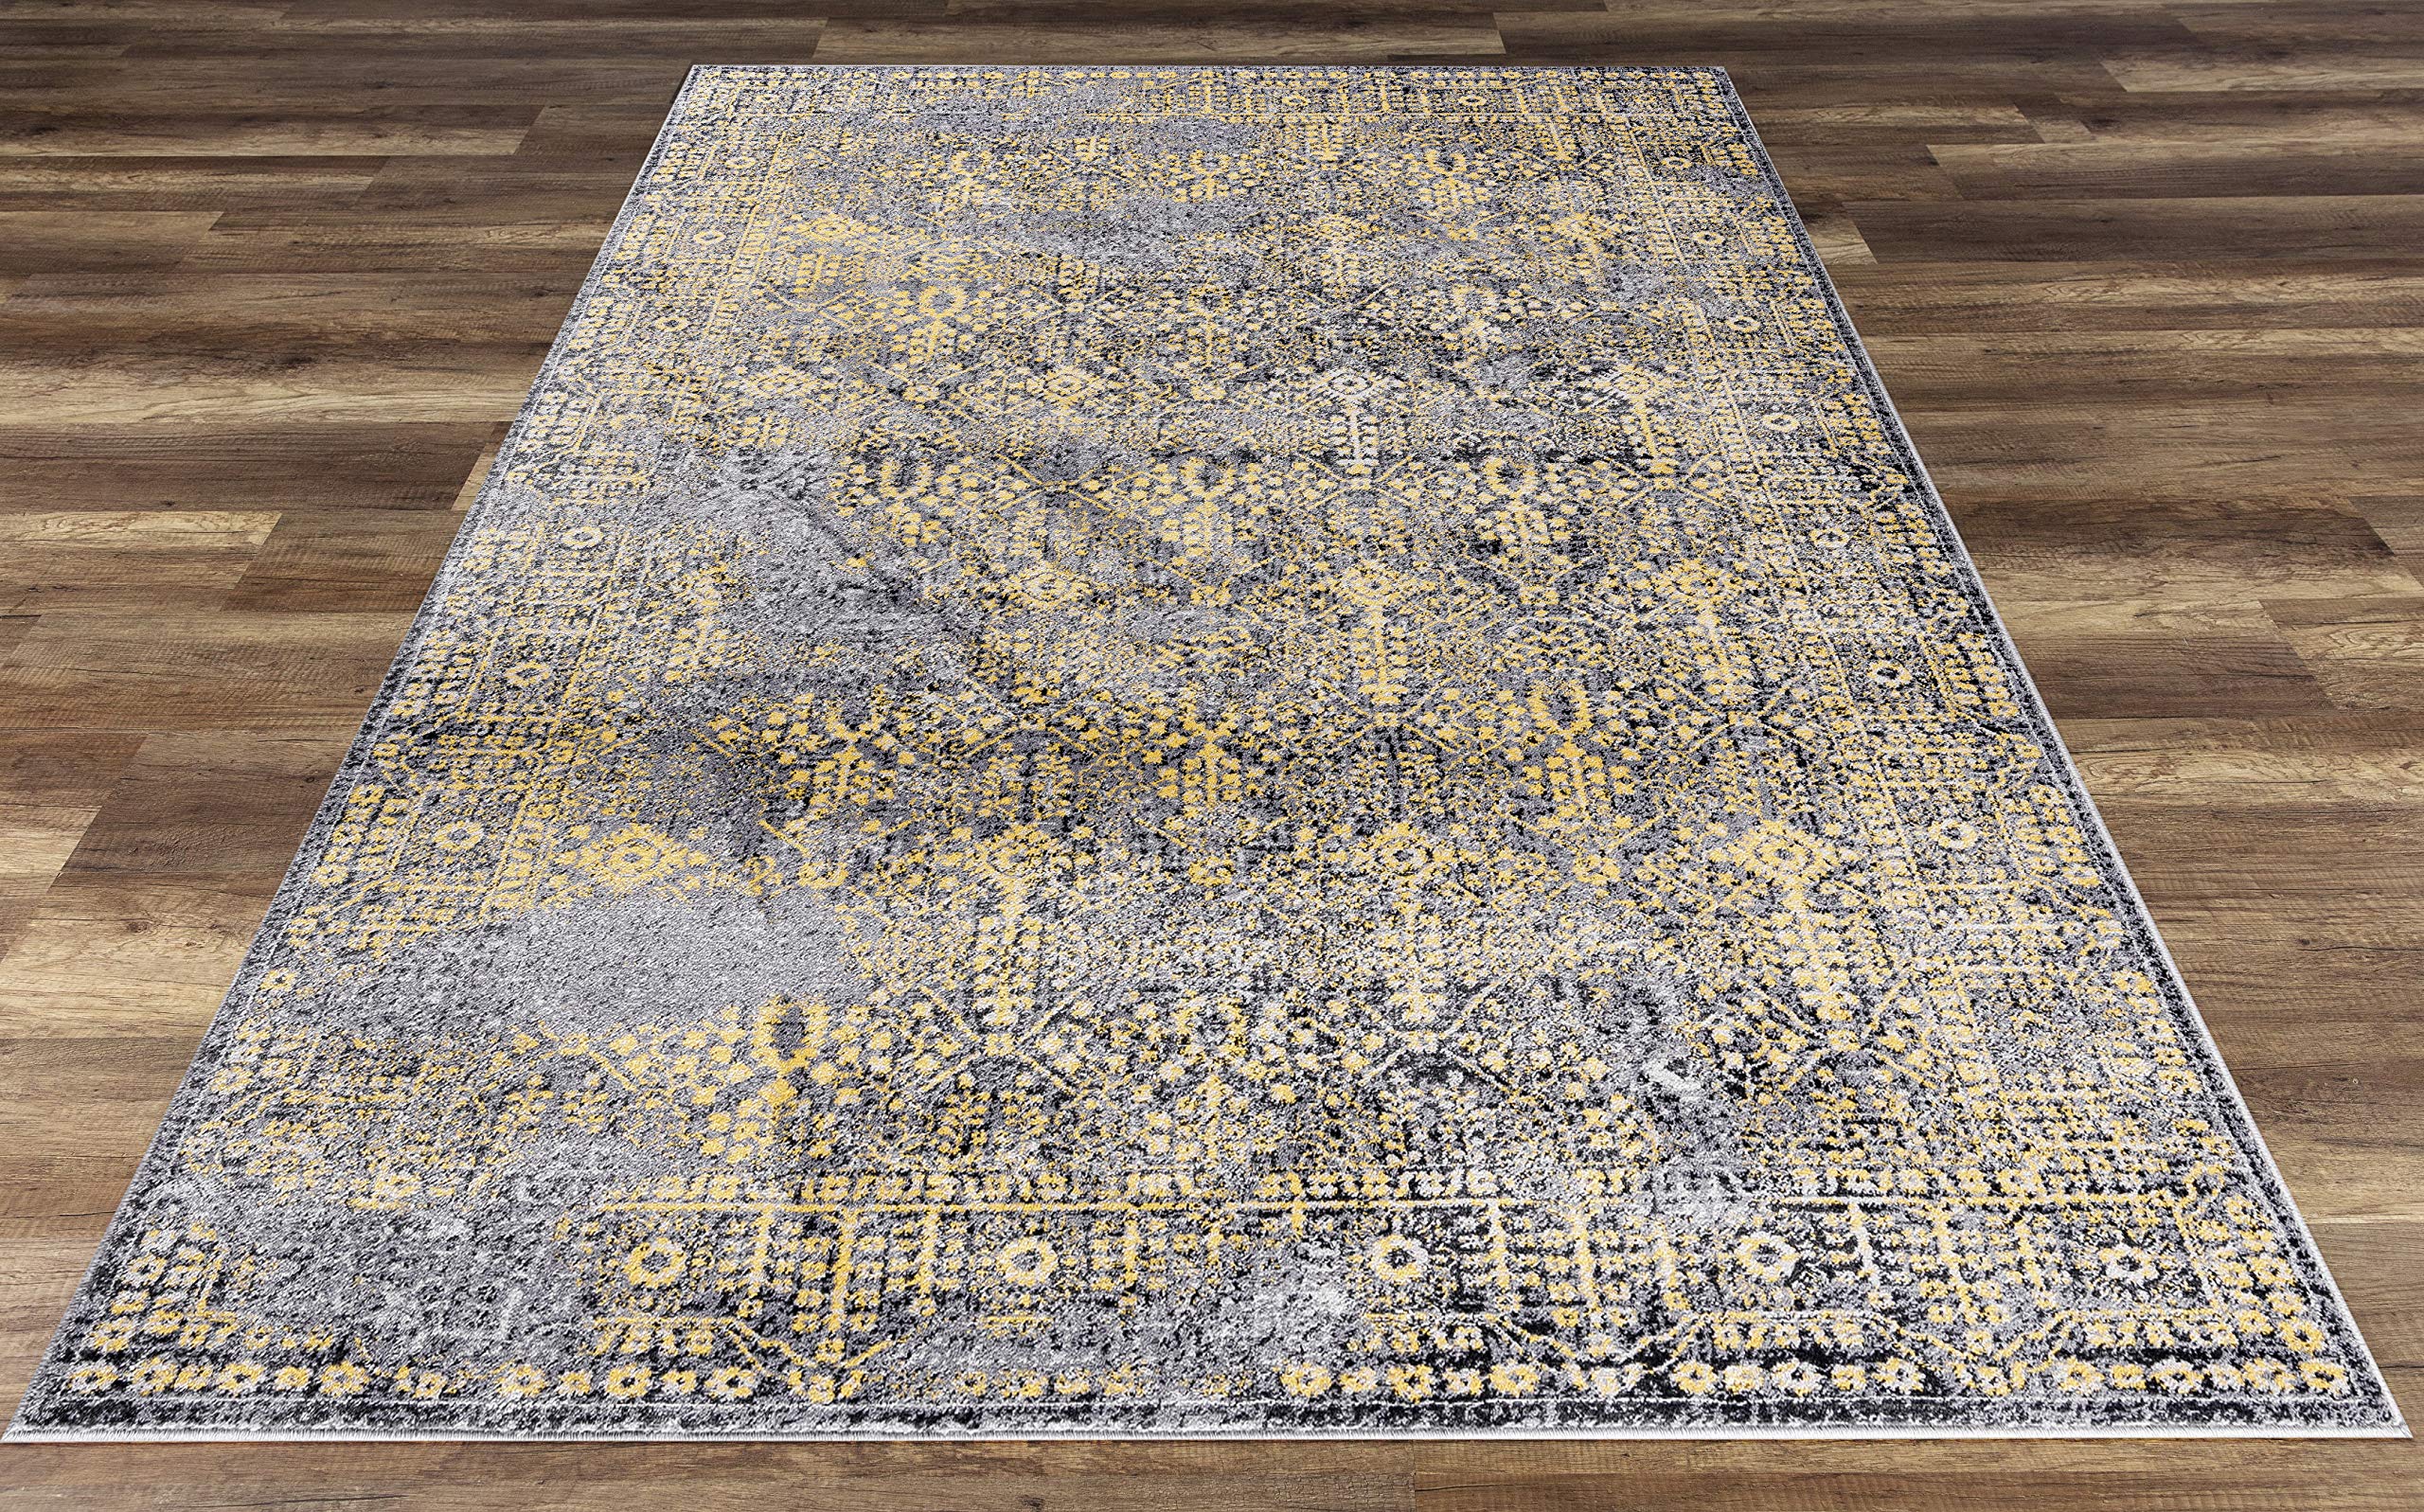 GAD Premium Indoor Contemporary Oriental Vintage Distressed Area Rug (5'3"x 7'6") Grey, Black & Yellow Abstract Living Room Rug - Hallway, High Traffic Inside Rug - Stain & Fade Resistant - image 3 of 5